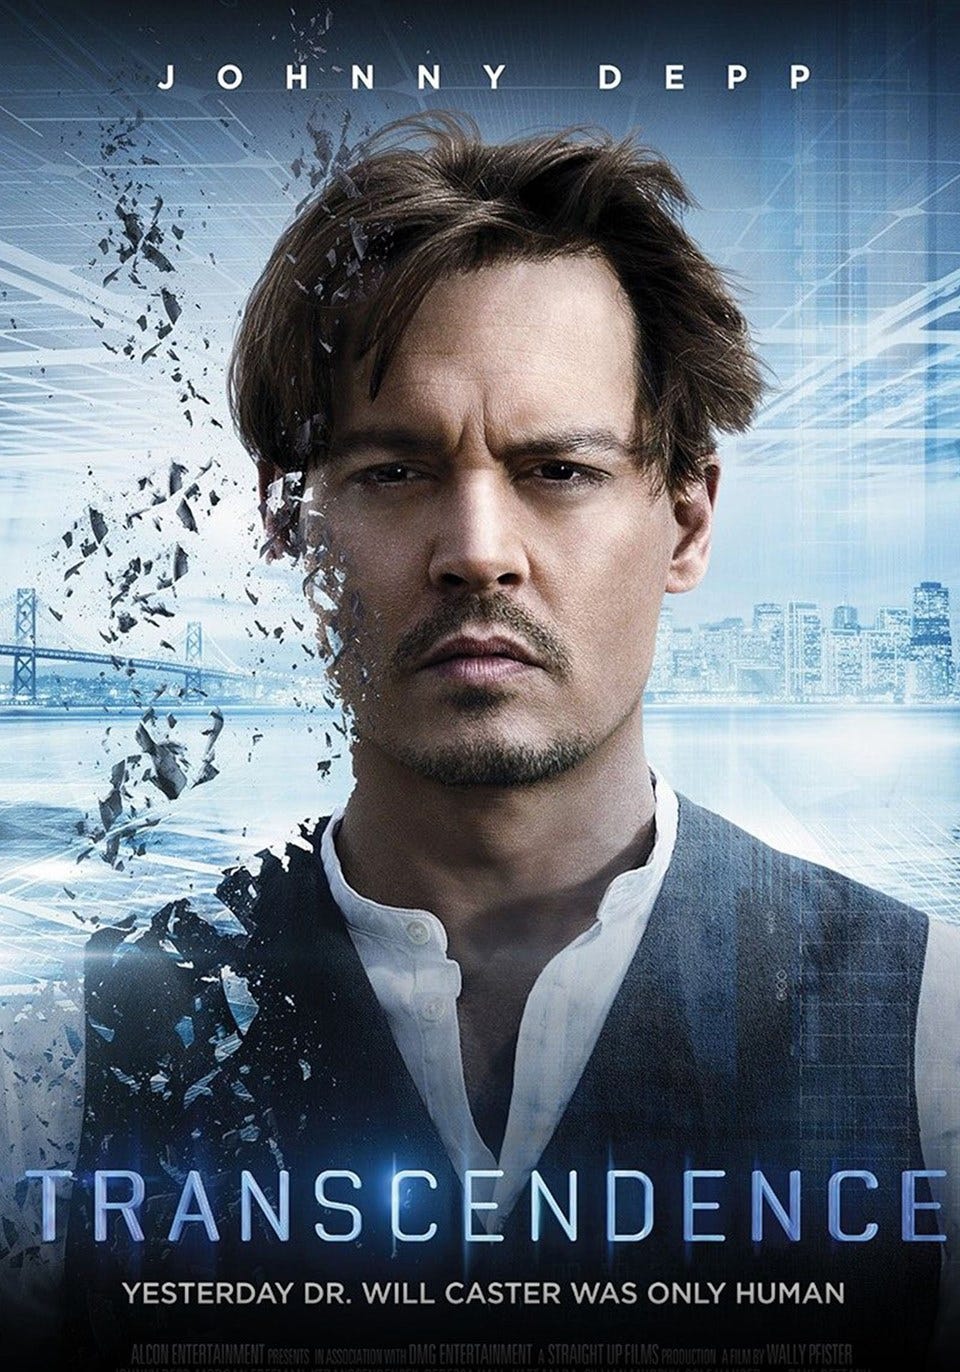 Transcendence movie review. Yesterday Dr. Will Caster was only